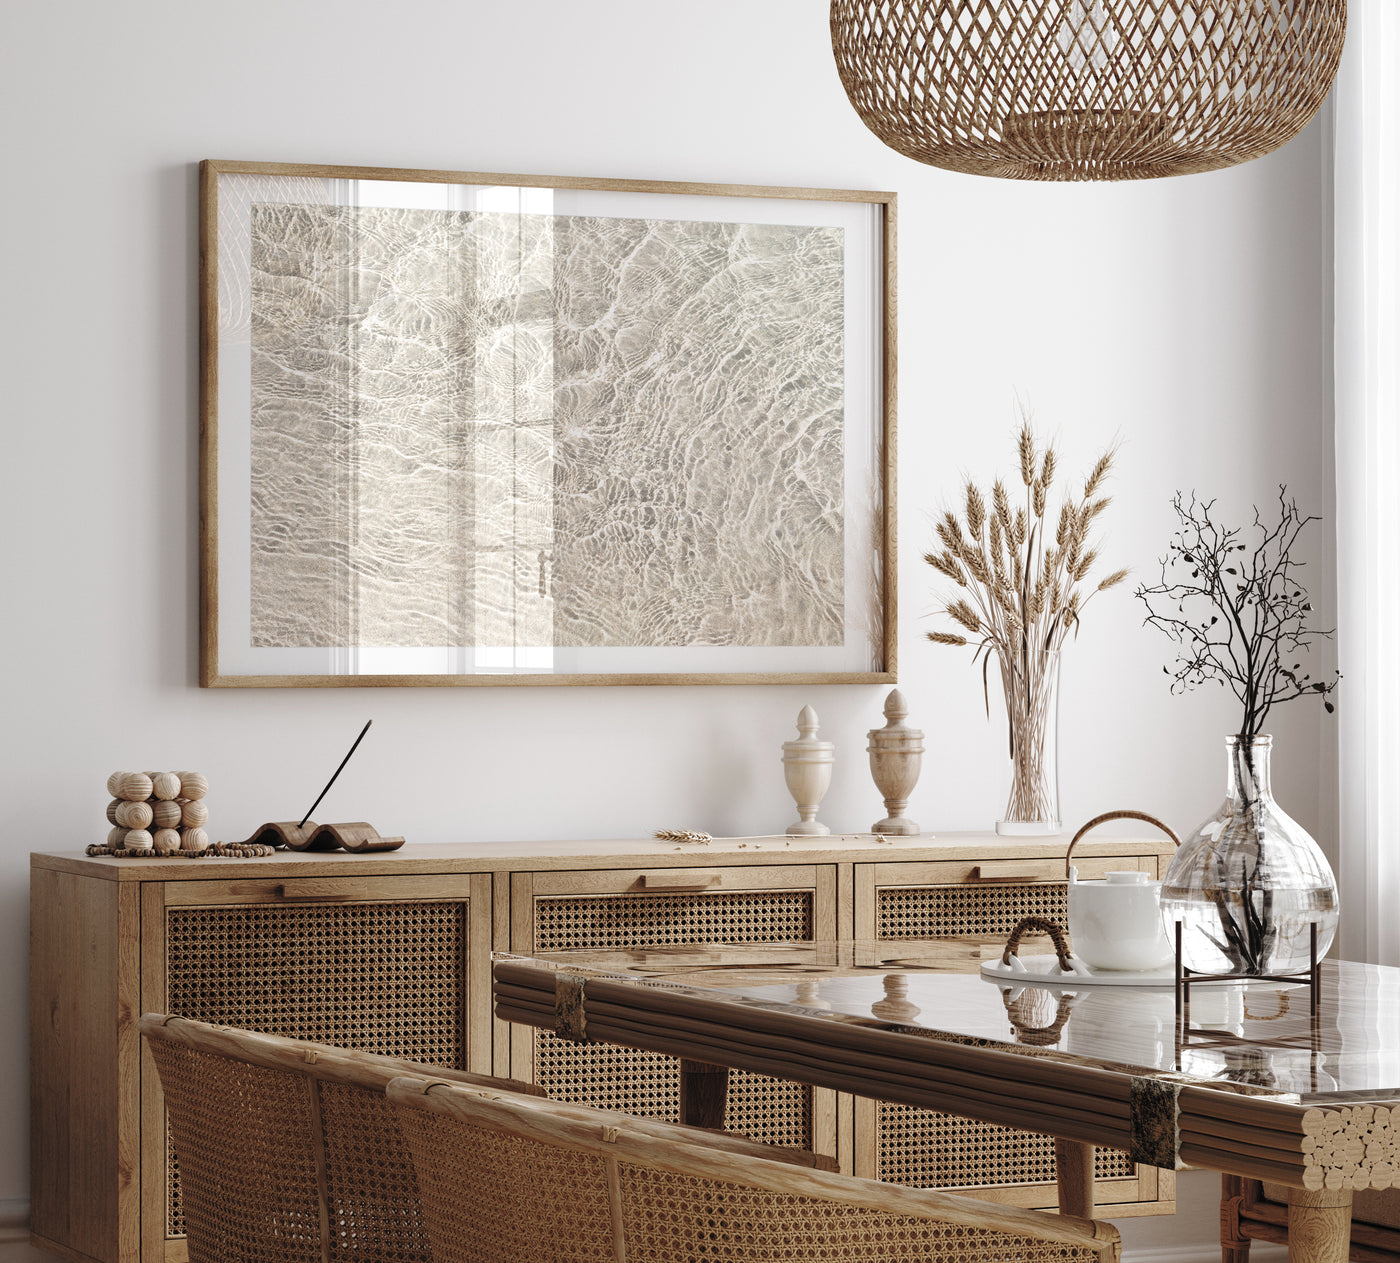 Shallow Water No 13 - Oversized neutral wall art by Cattie Coyle Photography in dining room